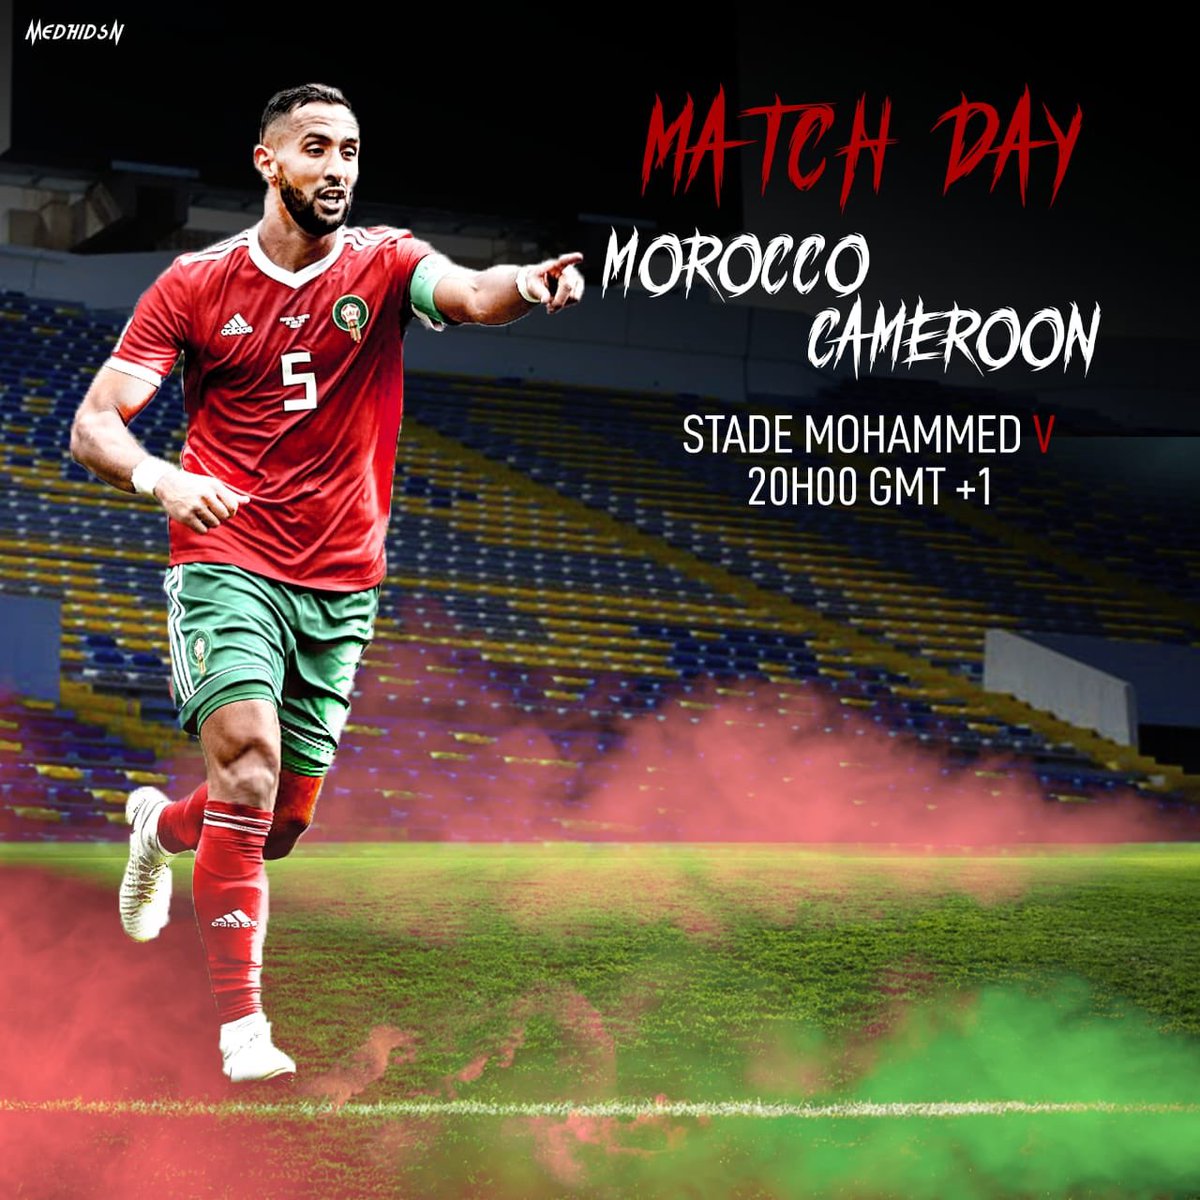 #DIMAMAGHRIB ❤️💚 🇲🇦🇲🇦🇲🇦 https://t.co/tVzhyqzk9e